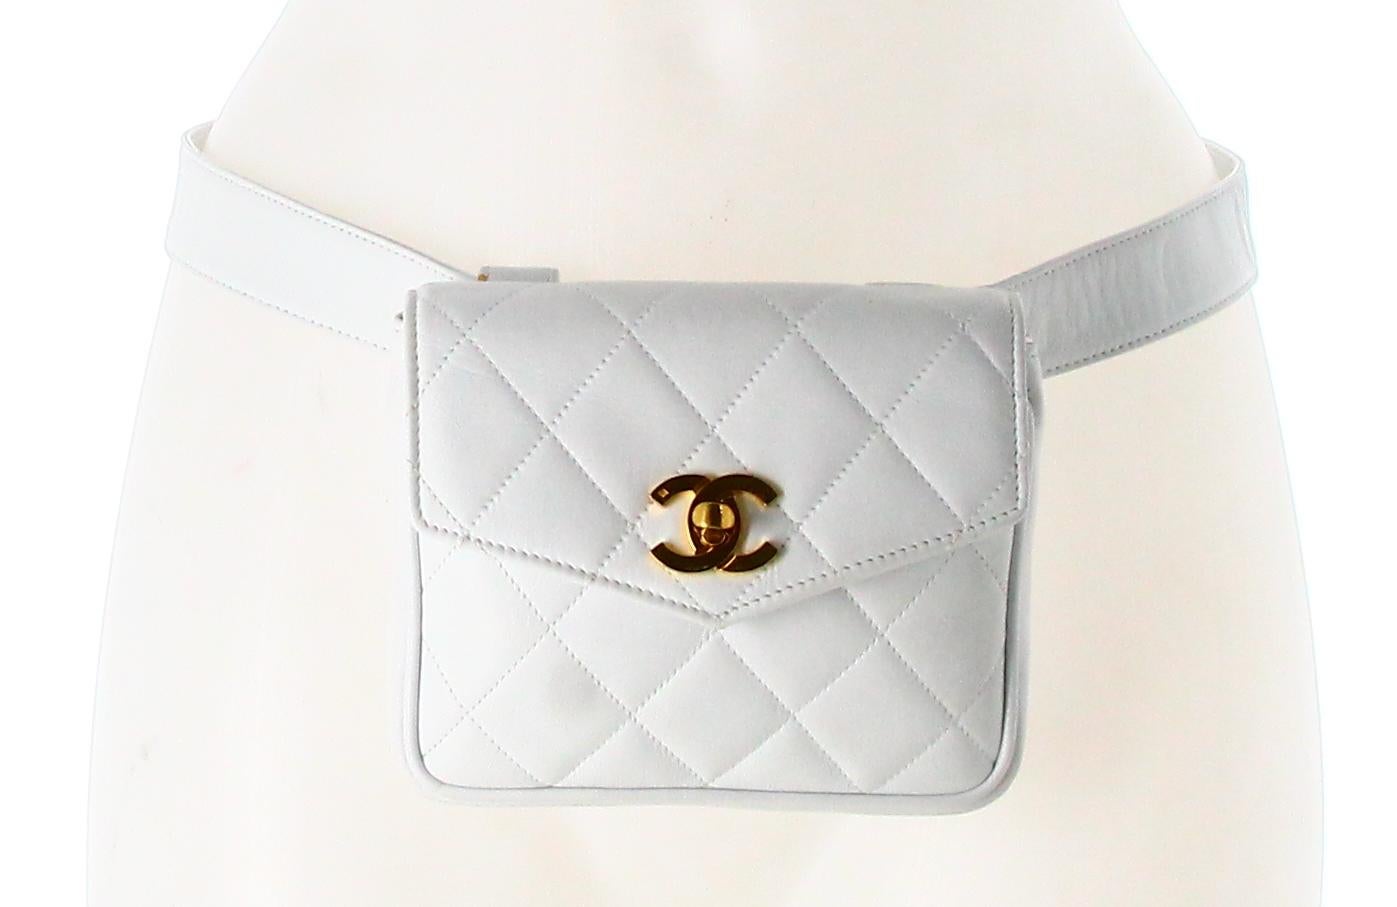 1994 Chanel CC Flap White Belt Bag

- Good condition. Shows signs of wear over time. 
- Chanel belt bag 
- White quilted leather
- Chanel golden logo clasp 
- Inside: white leather plus white belt